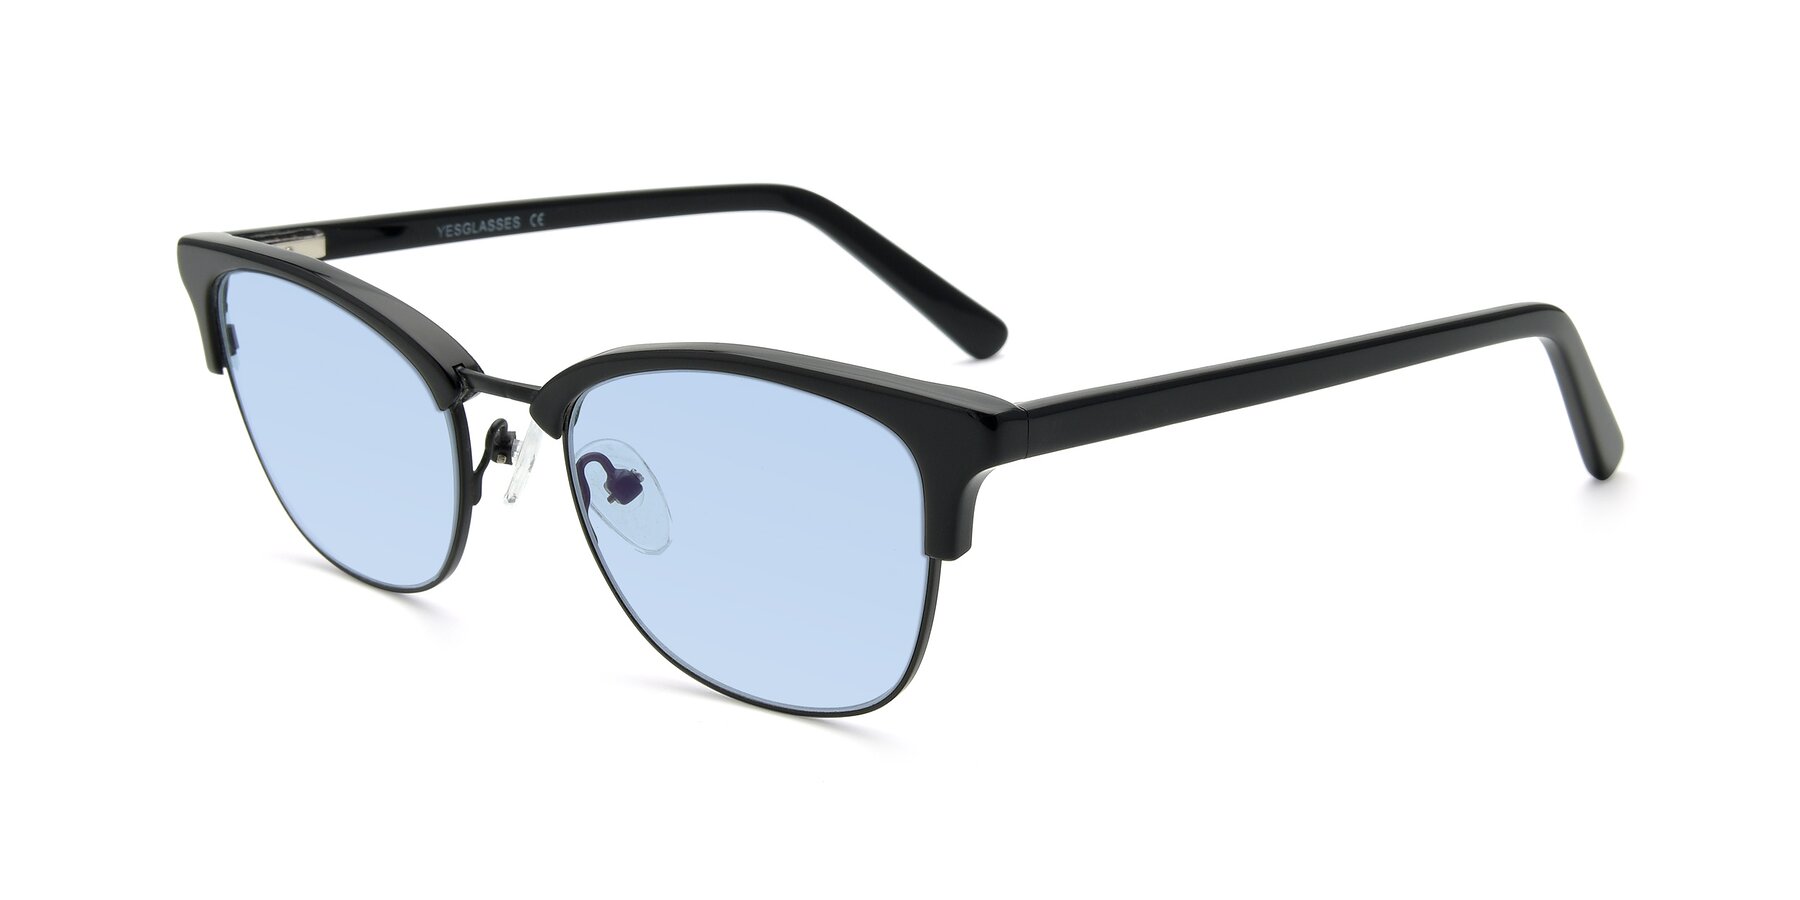 Angle of 17463 in Black with Light Blue Tinted Lenses